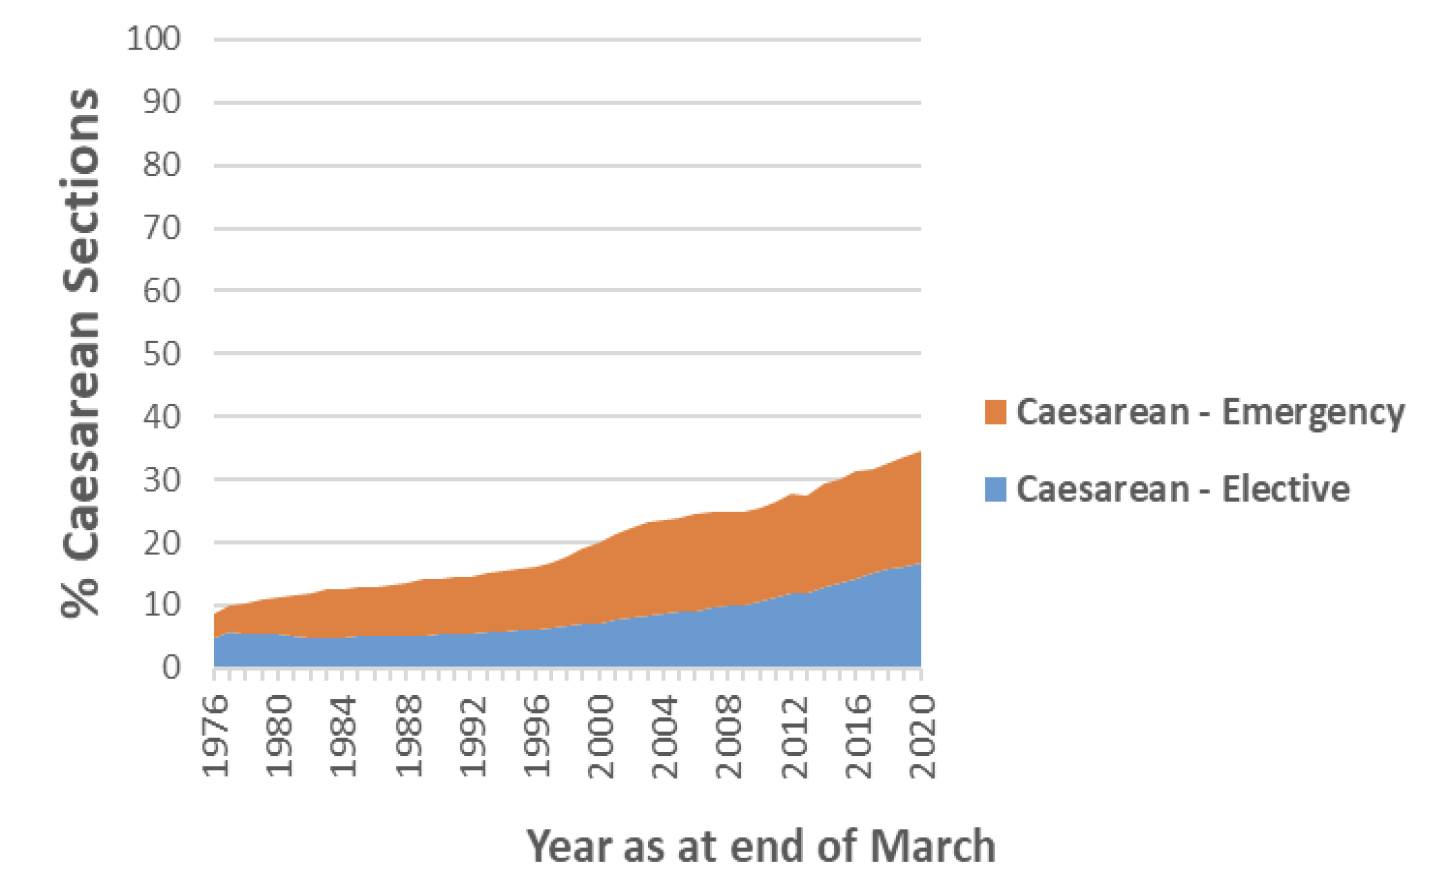 Chart 4 shows the overall caesarean section rate in the different regions of Scotland from 1997 to 2019. 